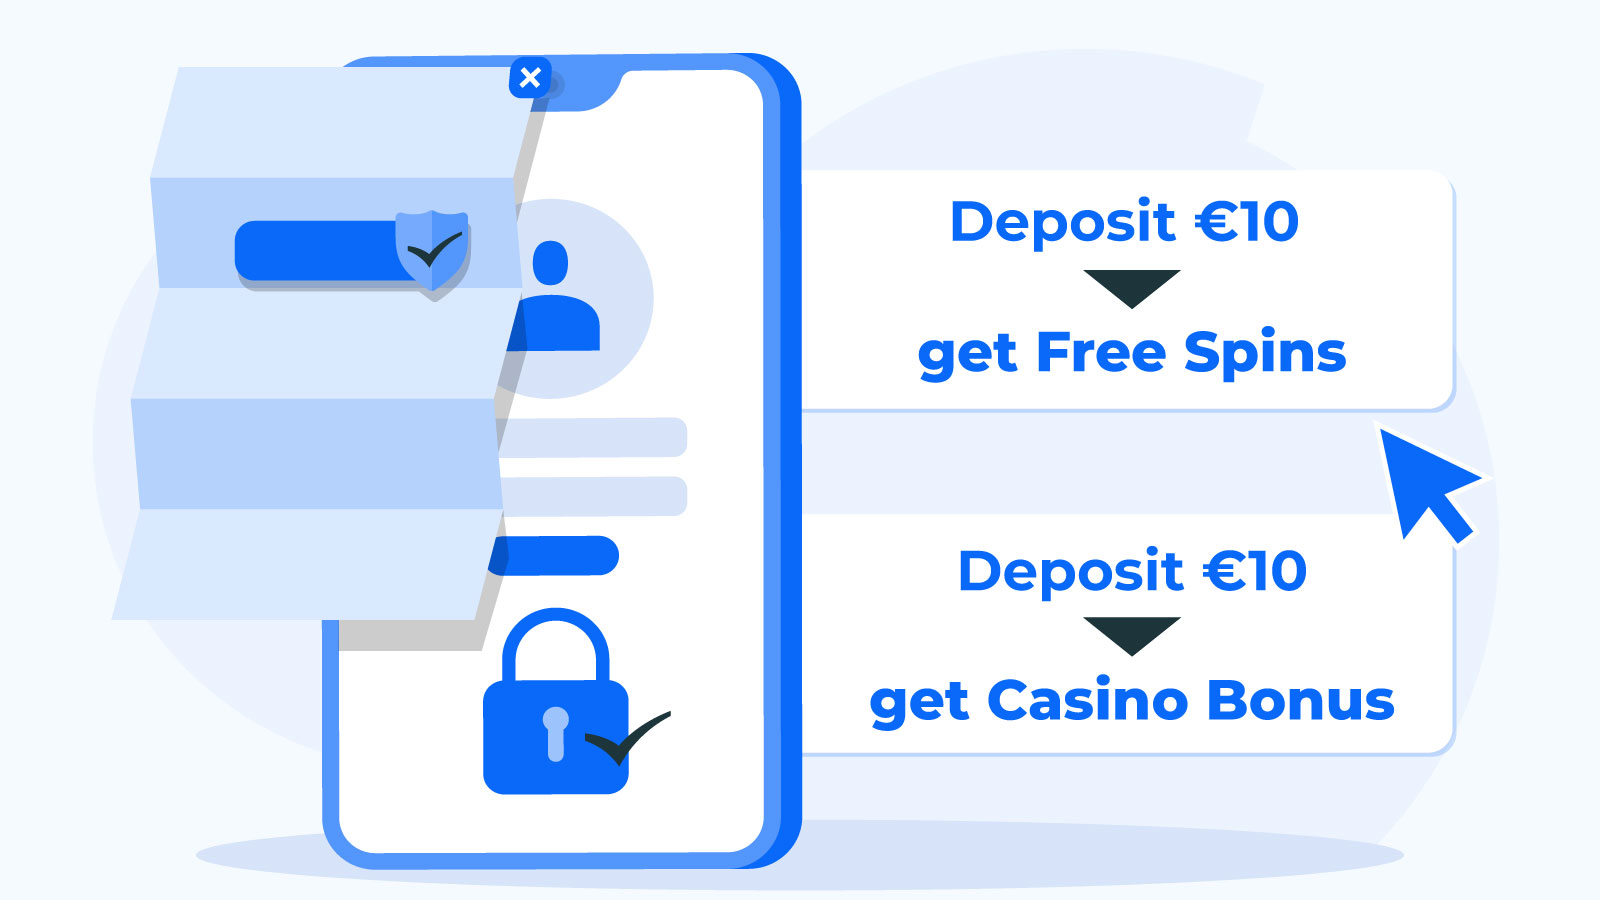 How to Sign-Up and Claim Your 10 Euro Deposit Bonus